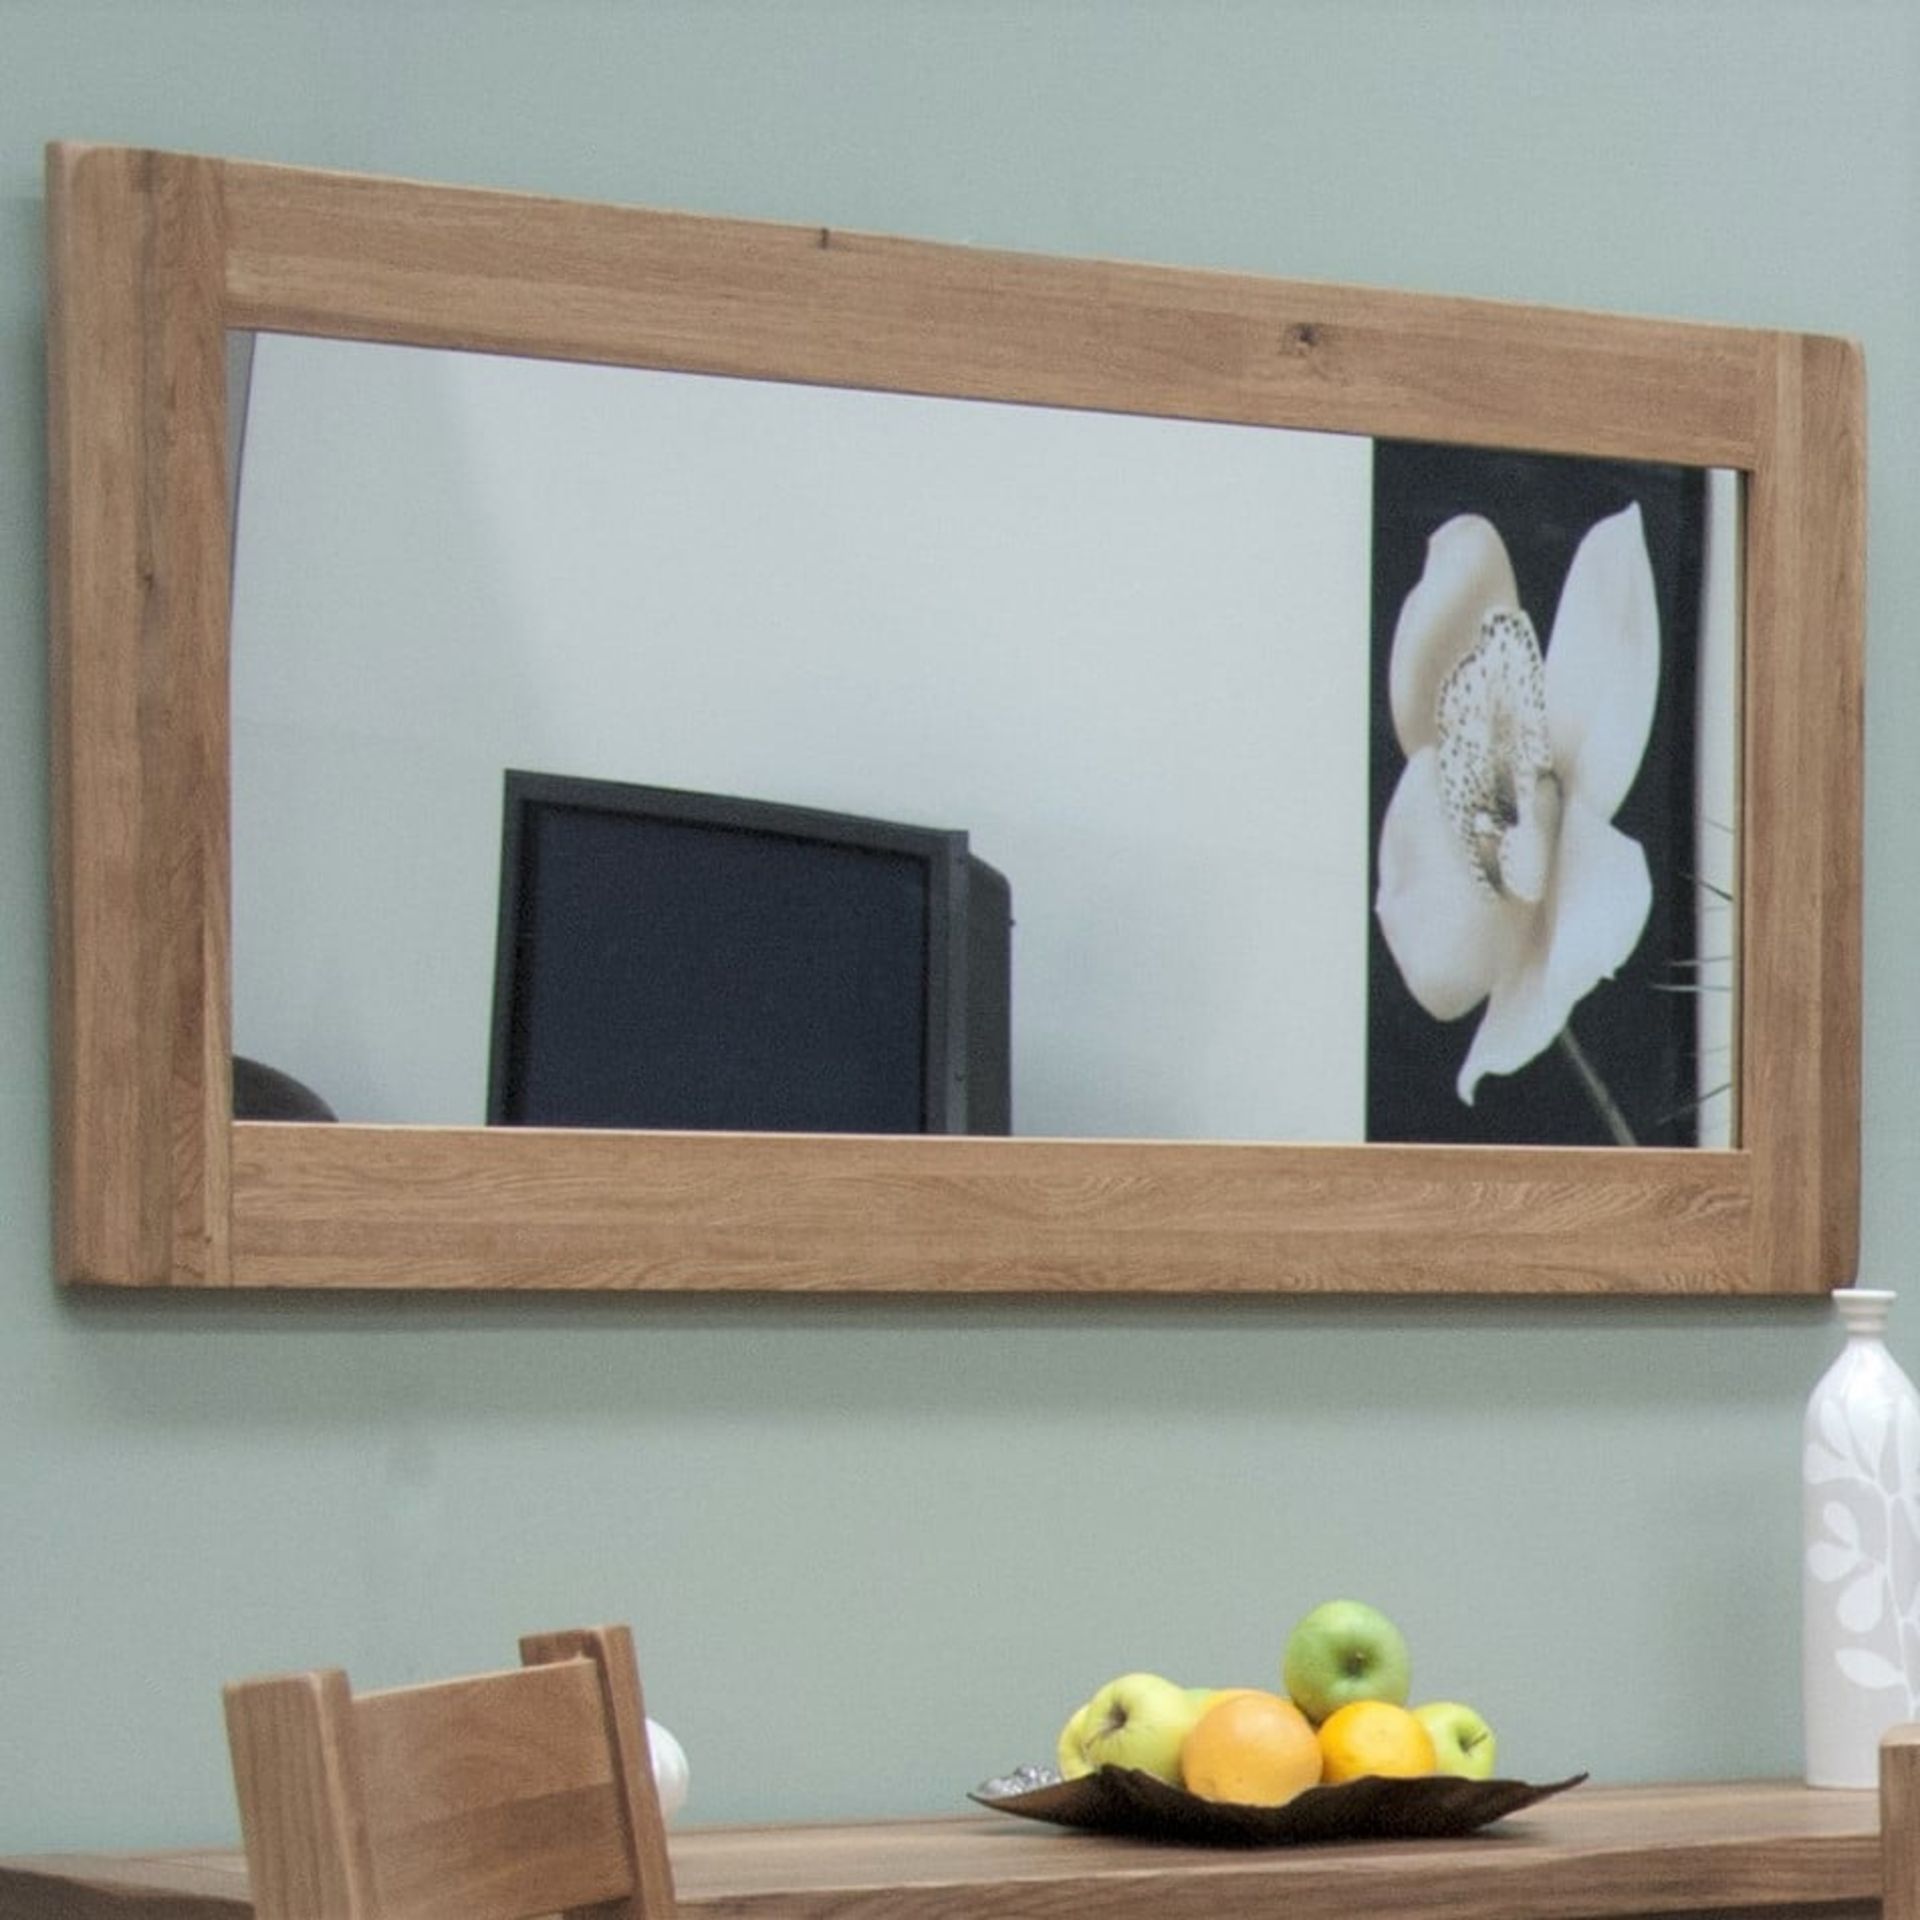 Marbello Rustic Wood Tall Huge Mirror To Inspire A Natural Look This Mirrors Rustic Frame Is Crafted